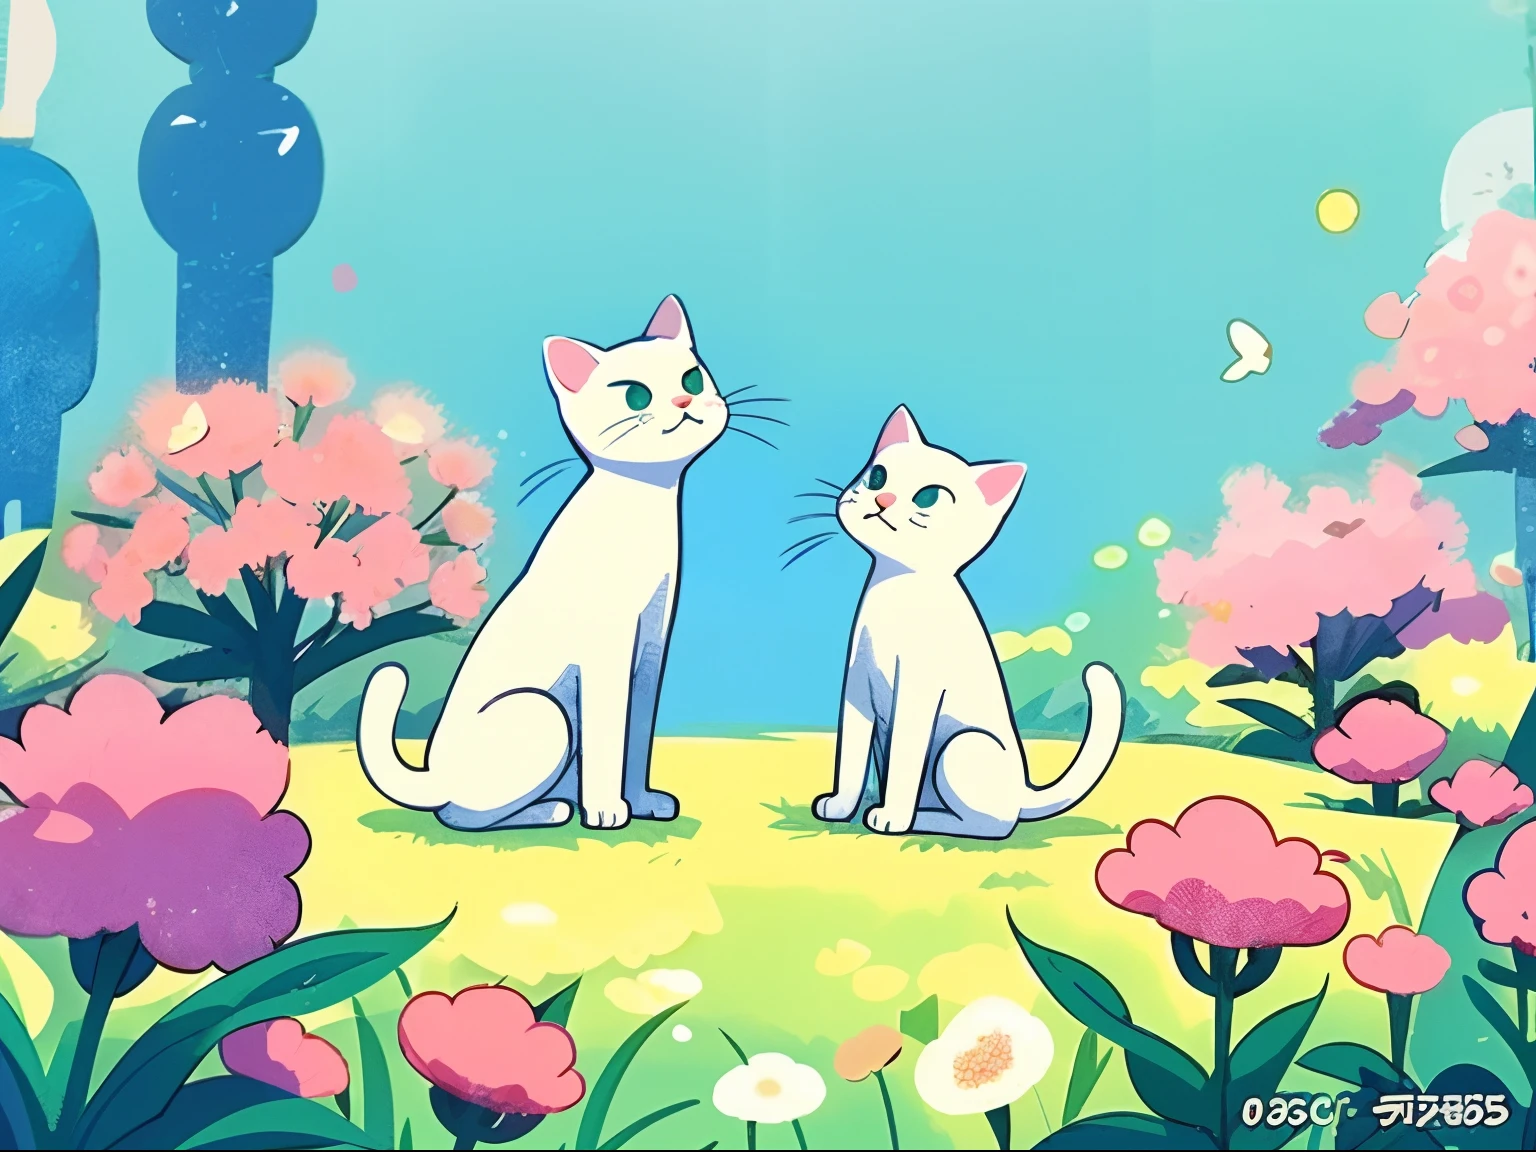 There is a white cat sitting on the green grass, lovely art style, Soft anime illustration, 、voice, Kawaii cat, White cat, anime visual of a cute cat, official fanart, Cute detailed digital art, anime cat, cute illustration, official character illustration, Furry cat, full-colour illustration, Anime style illustration, Cute cat, Digital anime illustration，Squat among the flowers，looking to the camera，Close-up, There are pink flowers around，simplebackground